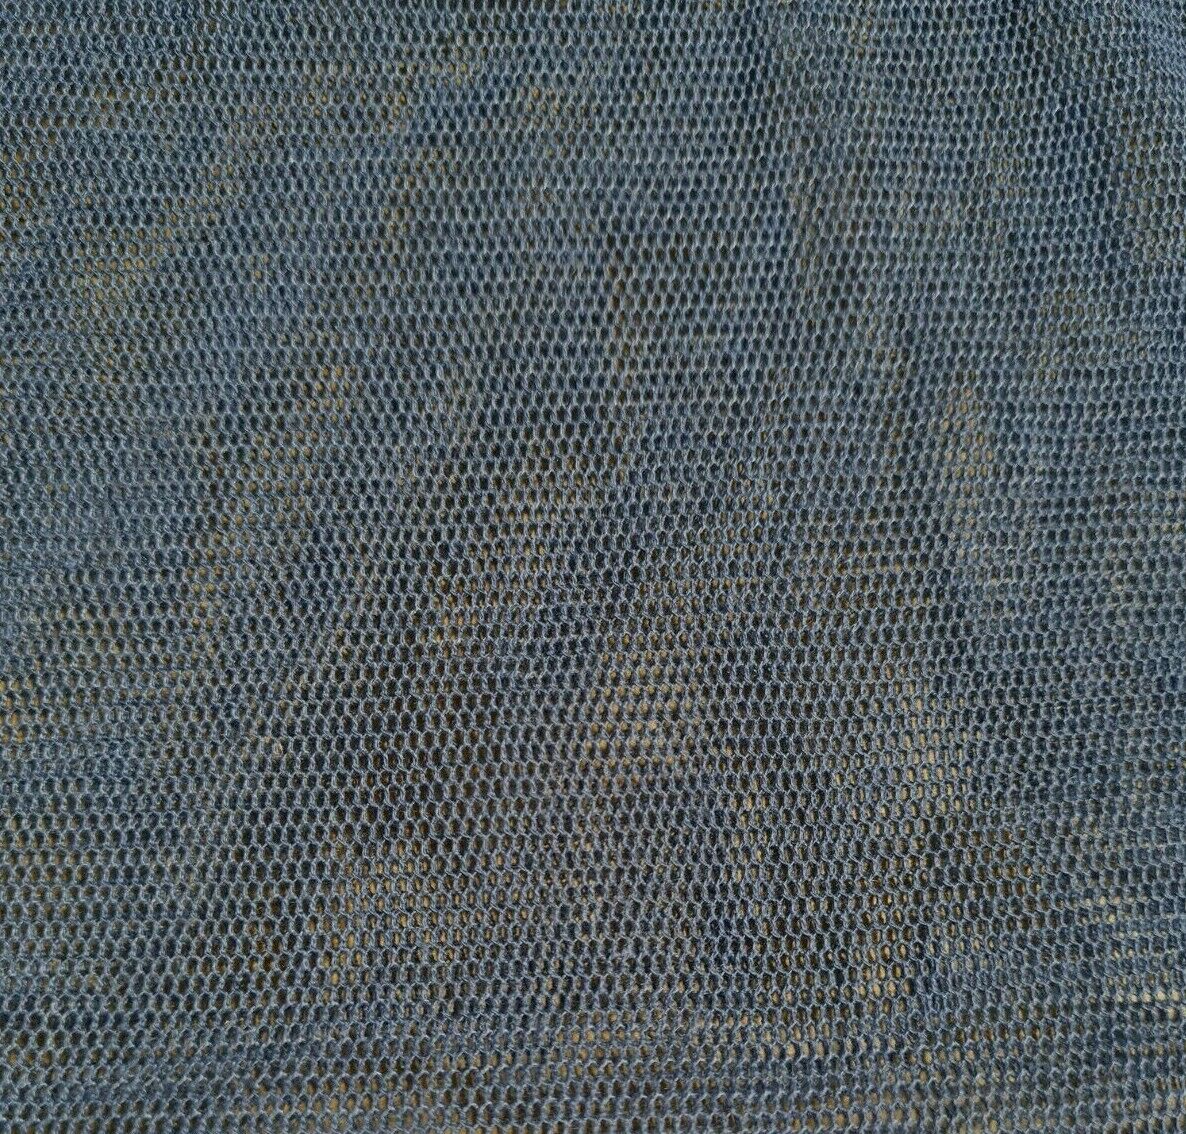 BROWN AND DARK BLUE TULLE NET FABRIC - SOLD BY THE METRE